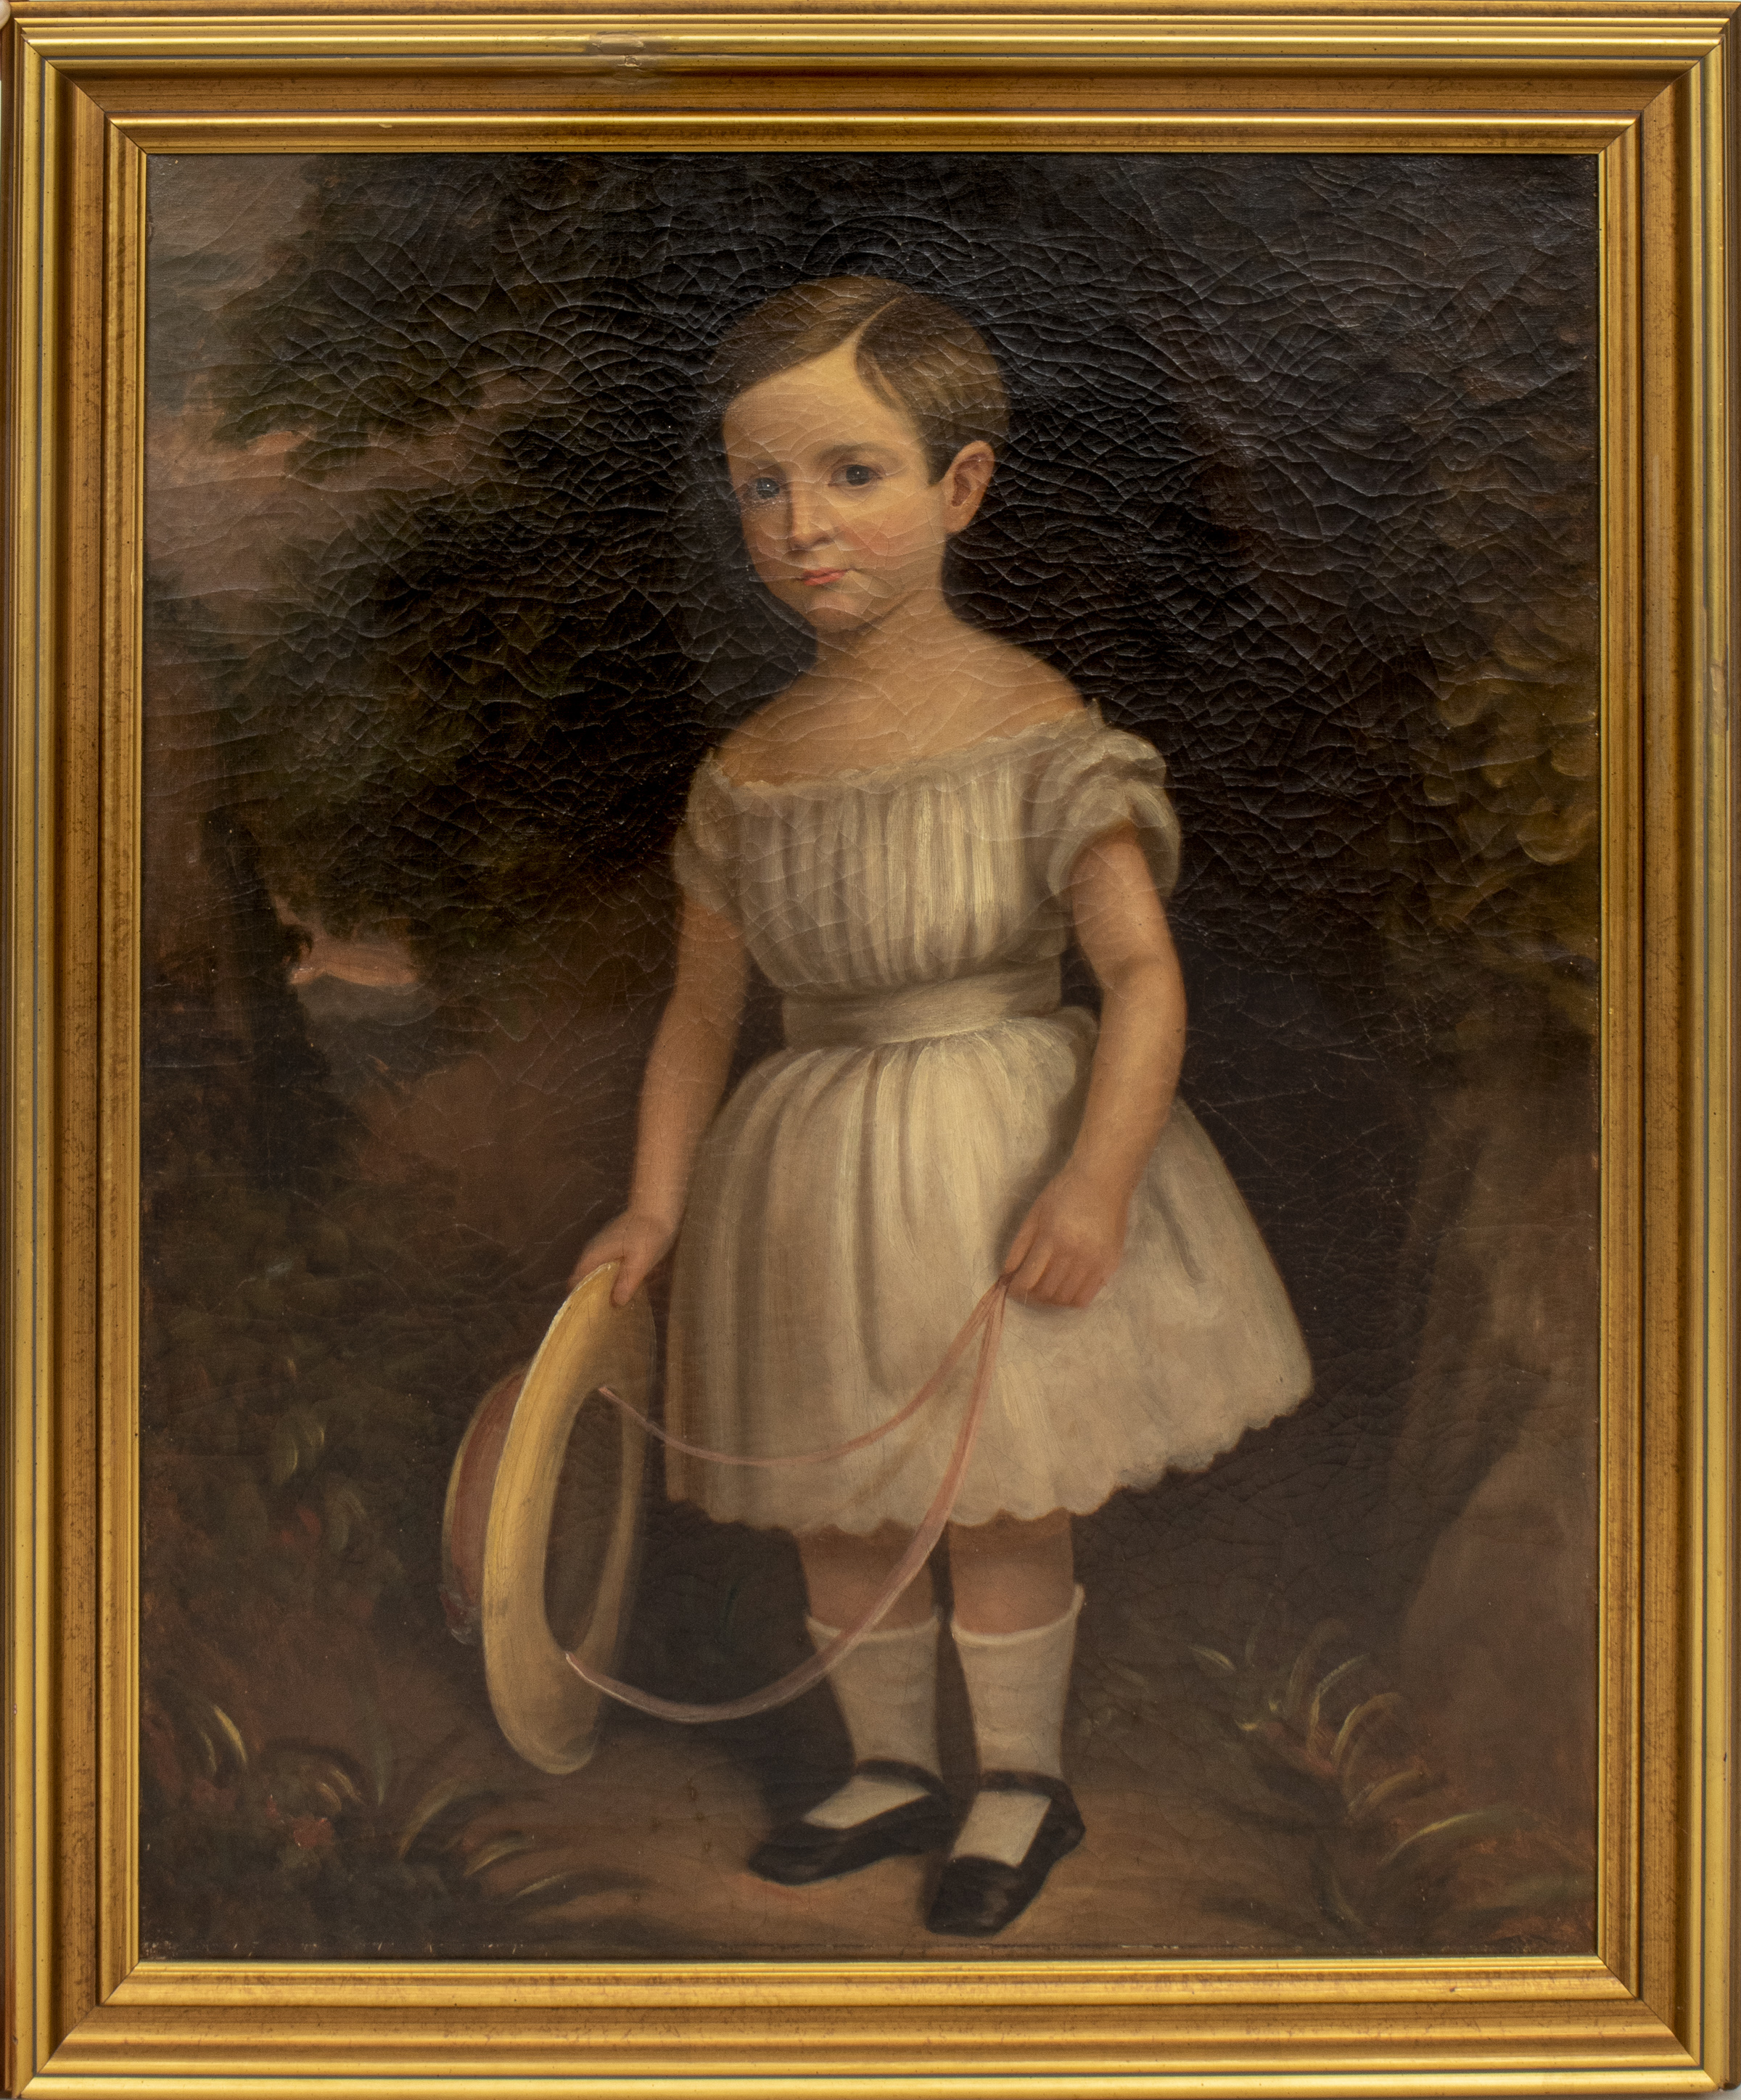 ANTIQUE PORTRAIT OF A GIRL WITH 3c4afe